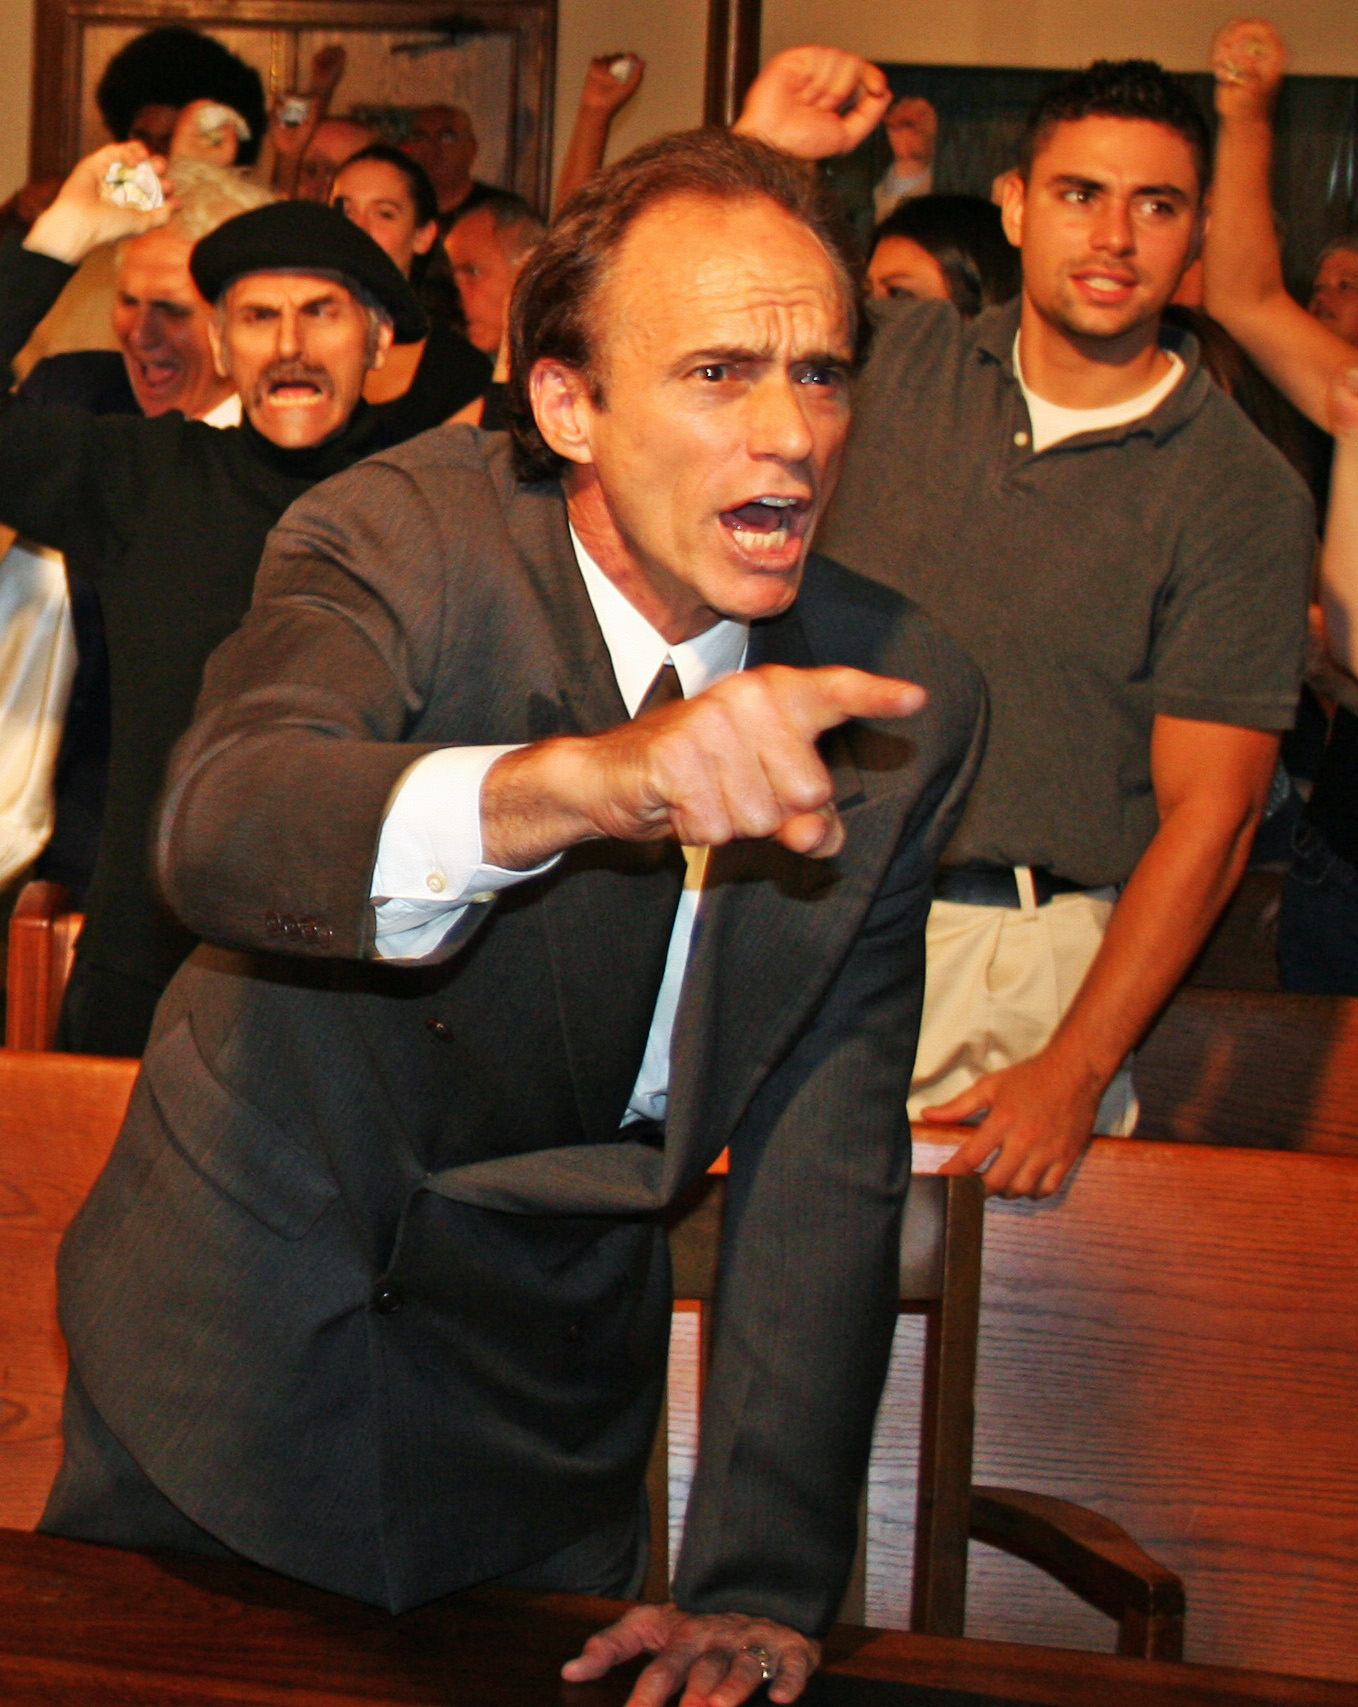 Carson Grant portrays 'Dr. Donovin' and 'Dubious' in this picture 